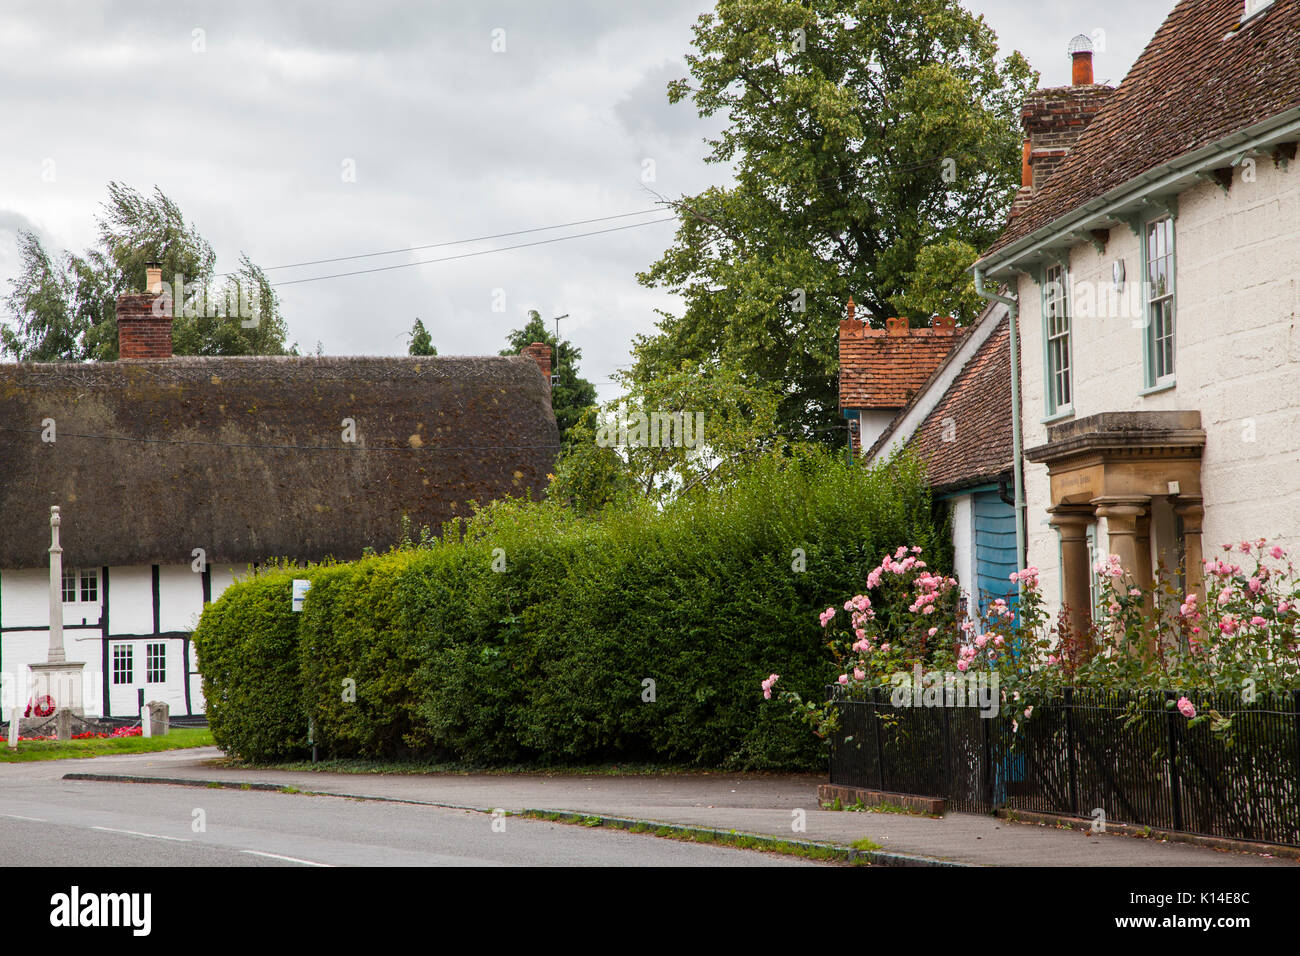 View Of English Country Cottages In The Village Of Dorchester On